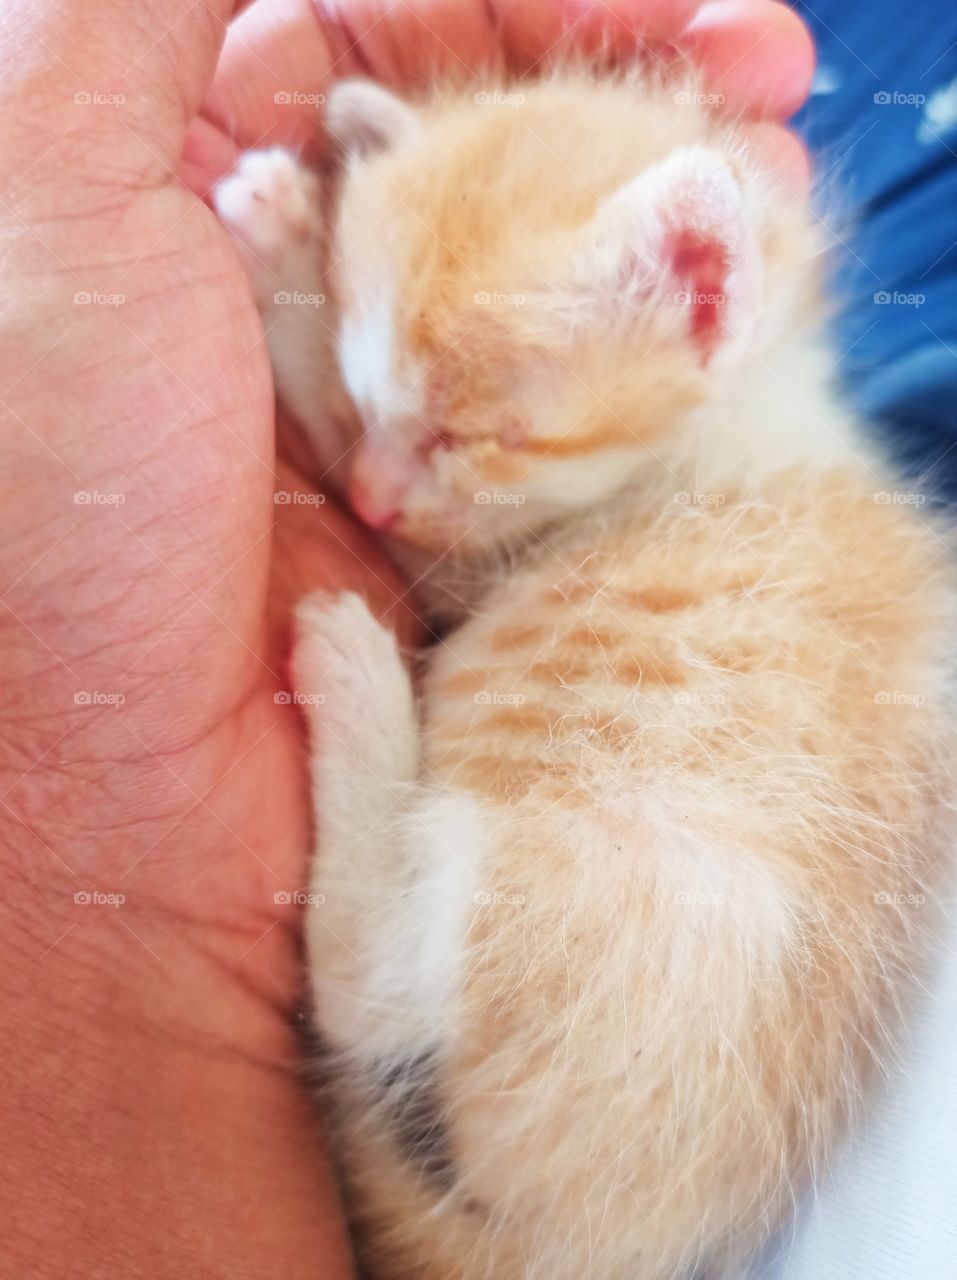 a simple nap of a kitten on a palm of an adult man